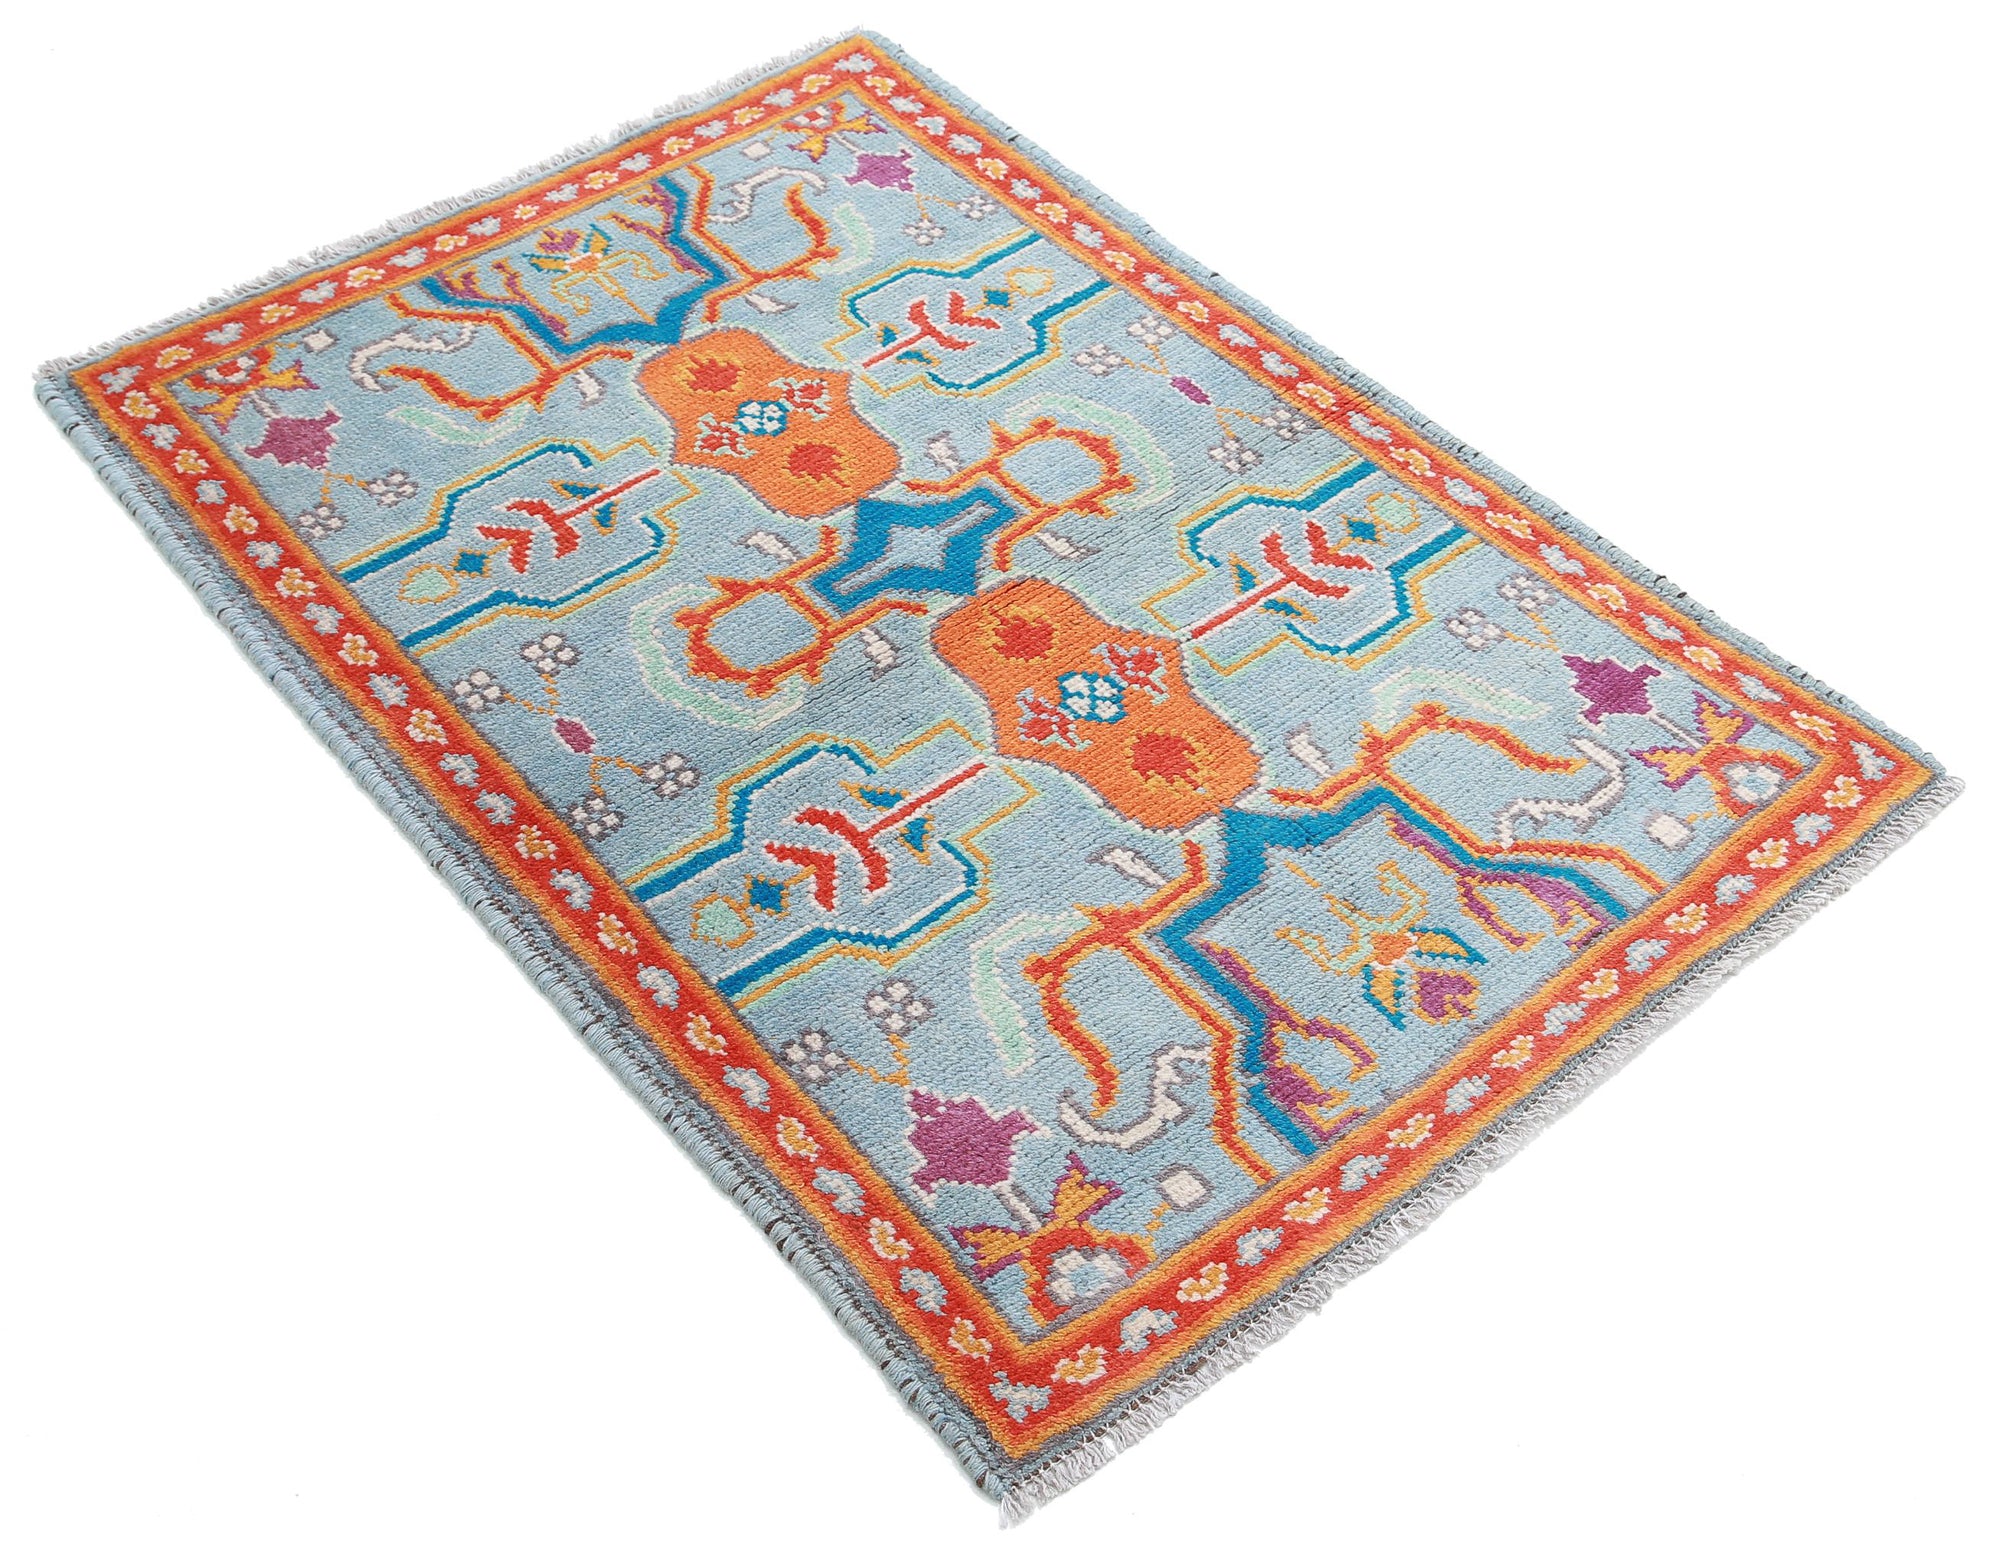 Revival-hand-knotted-qarghani-wool-rug-5014011-1.jpg